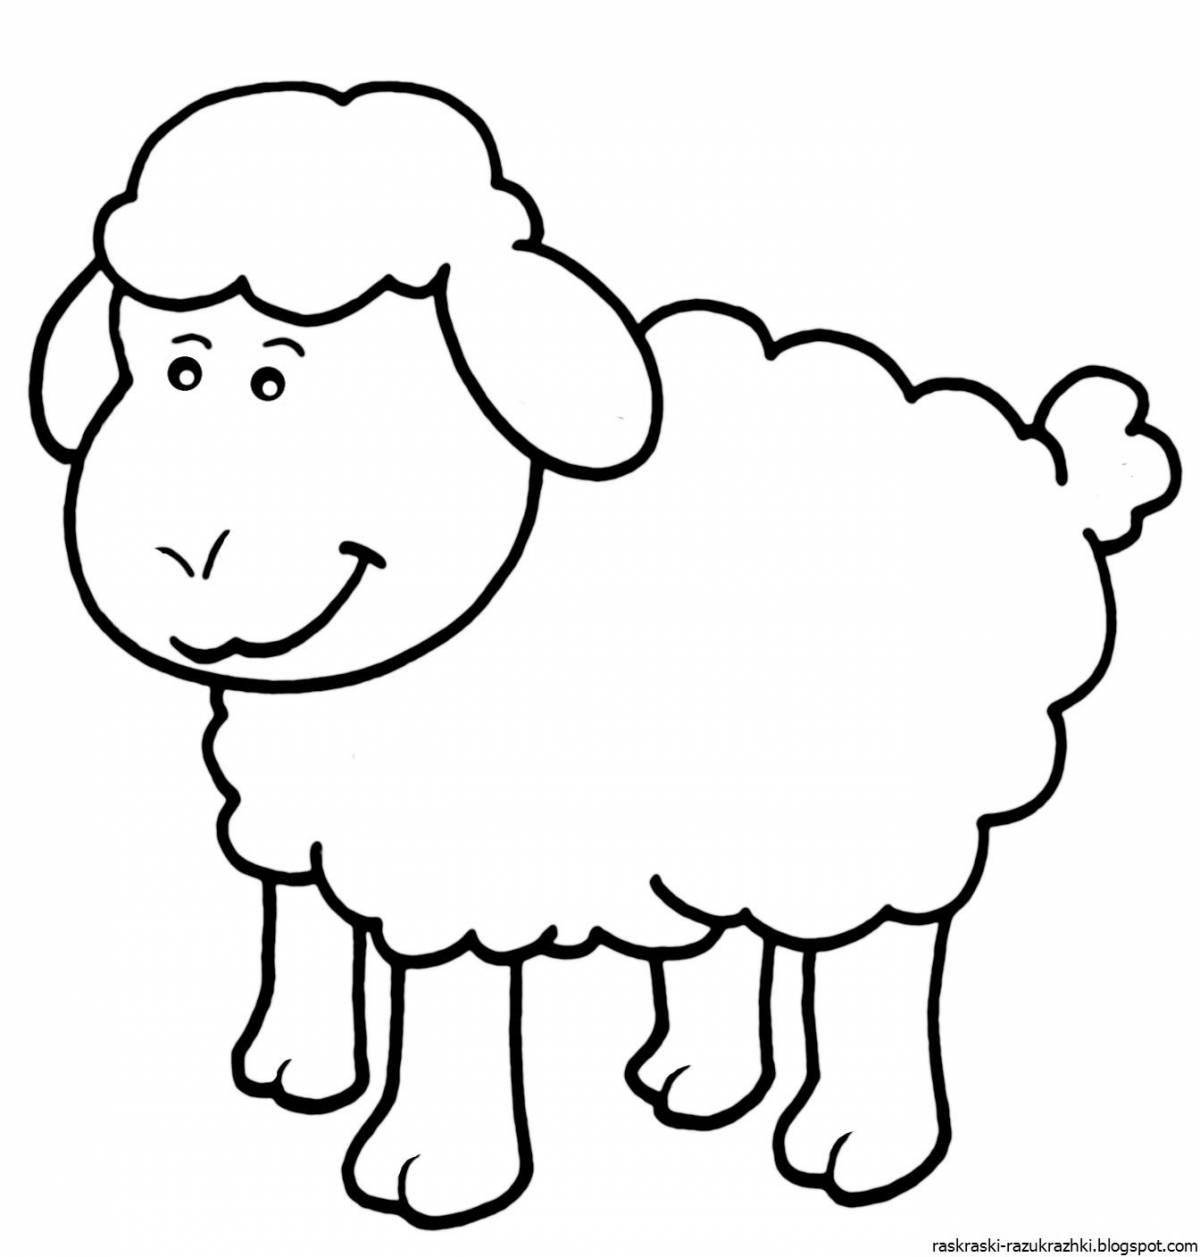 Coloring cute sheep for children 2-3 years old